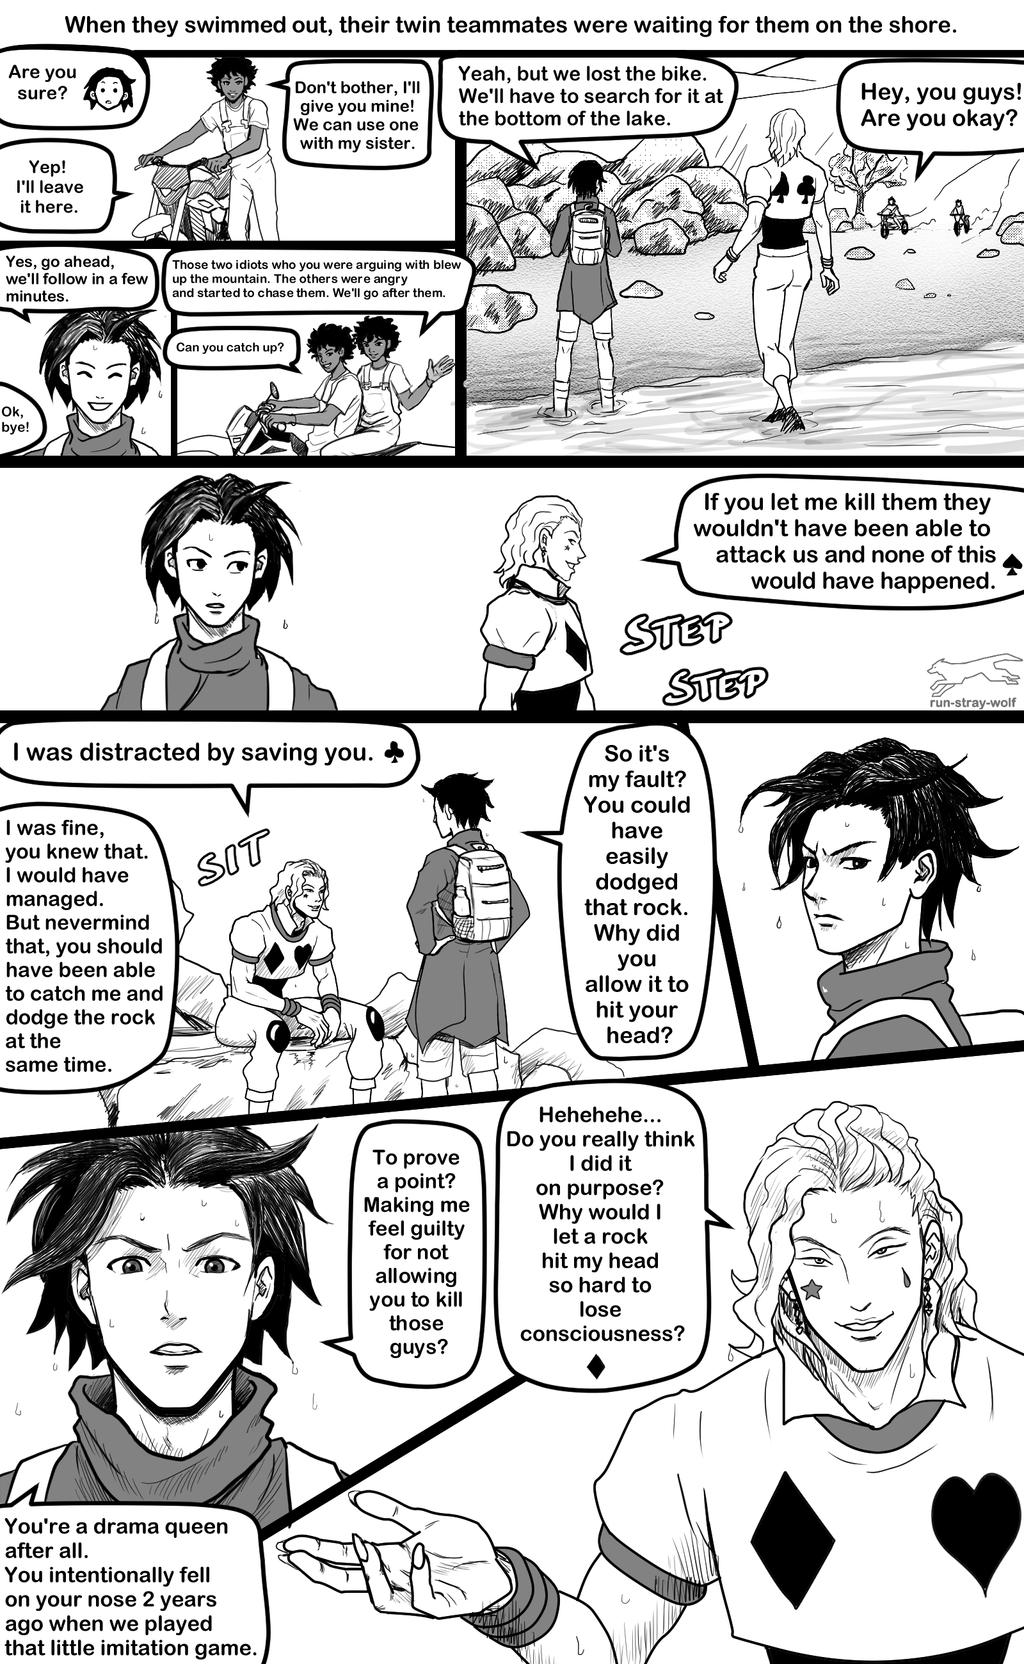 A miracle smile - PAGE 4 by RunStrayWolf on DeviantArt